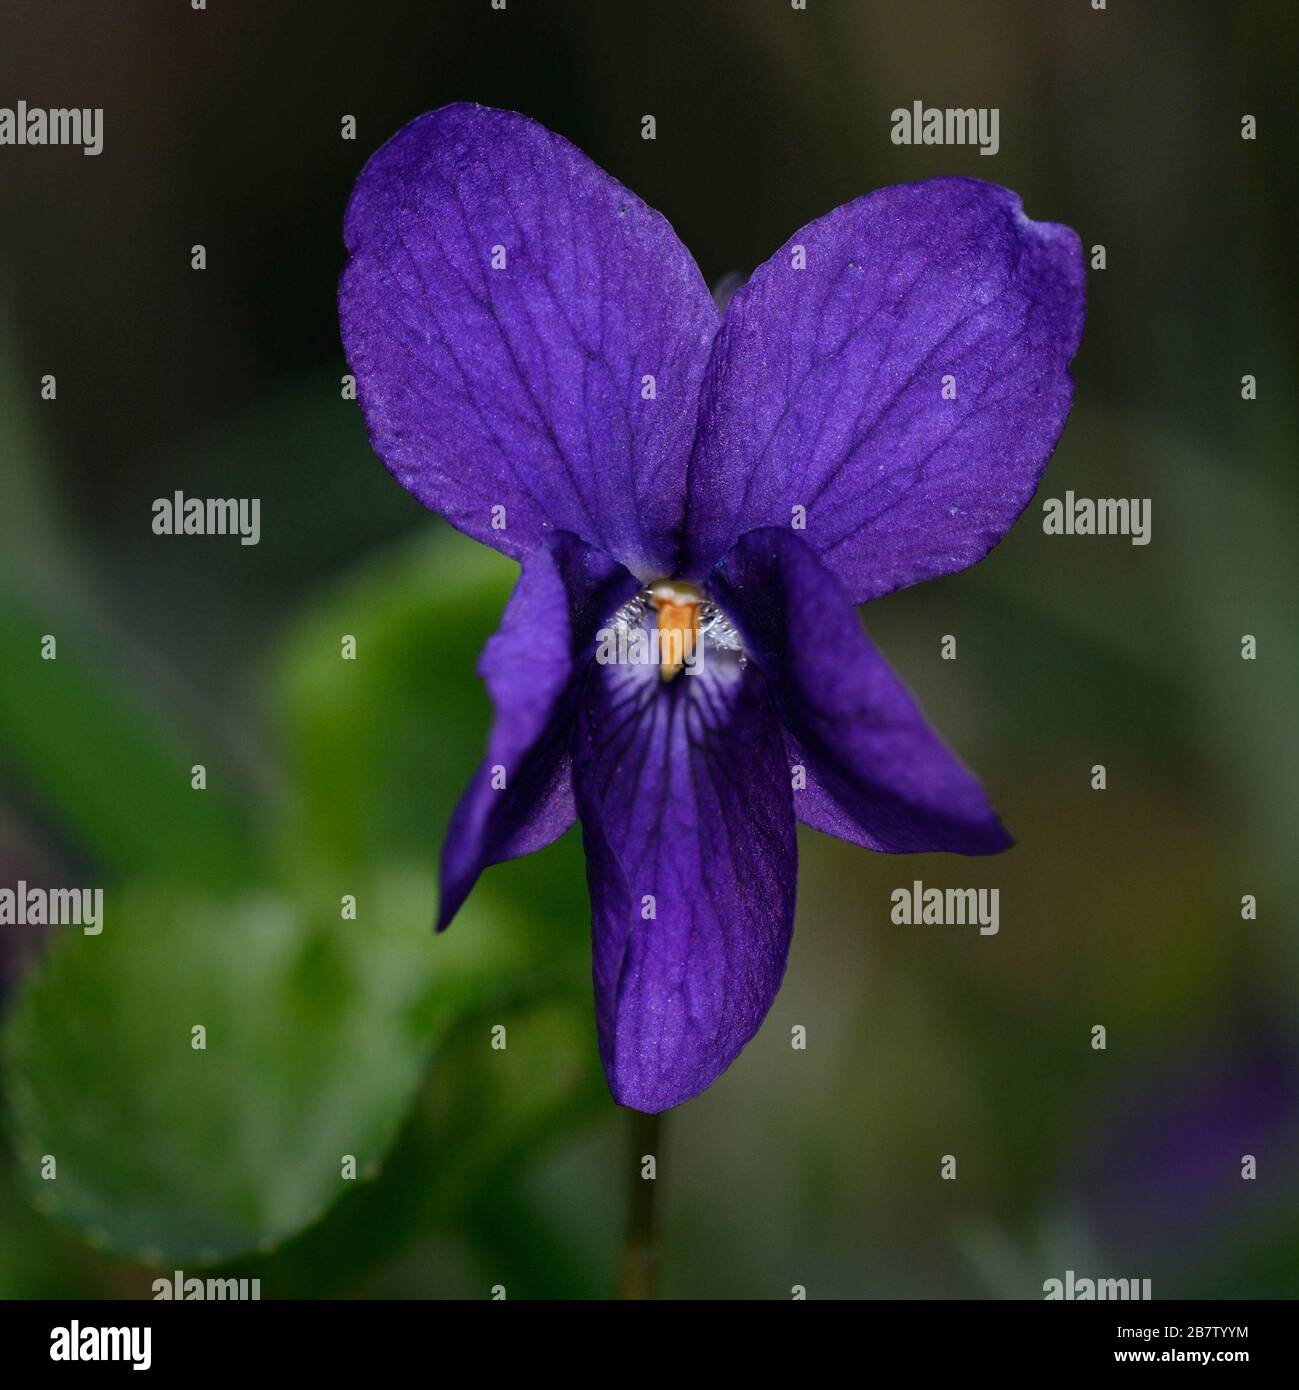 close-up of purple violet flower on blurred green background Stock Photo